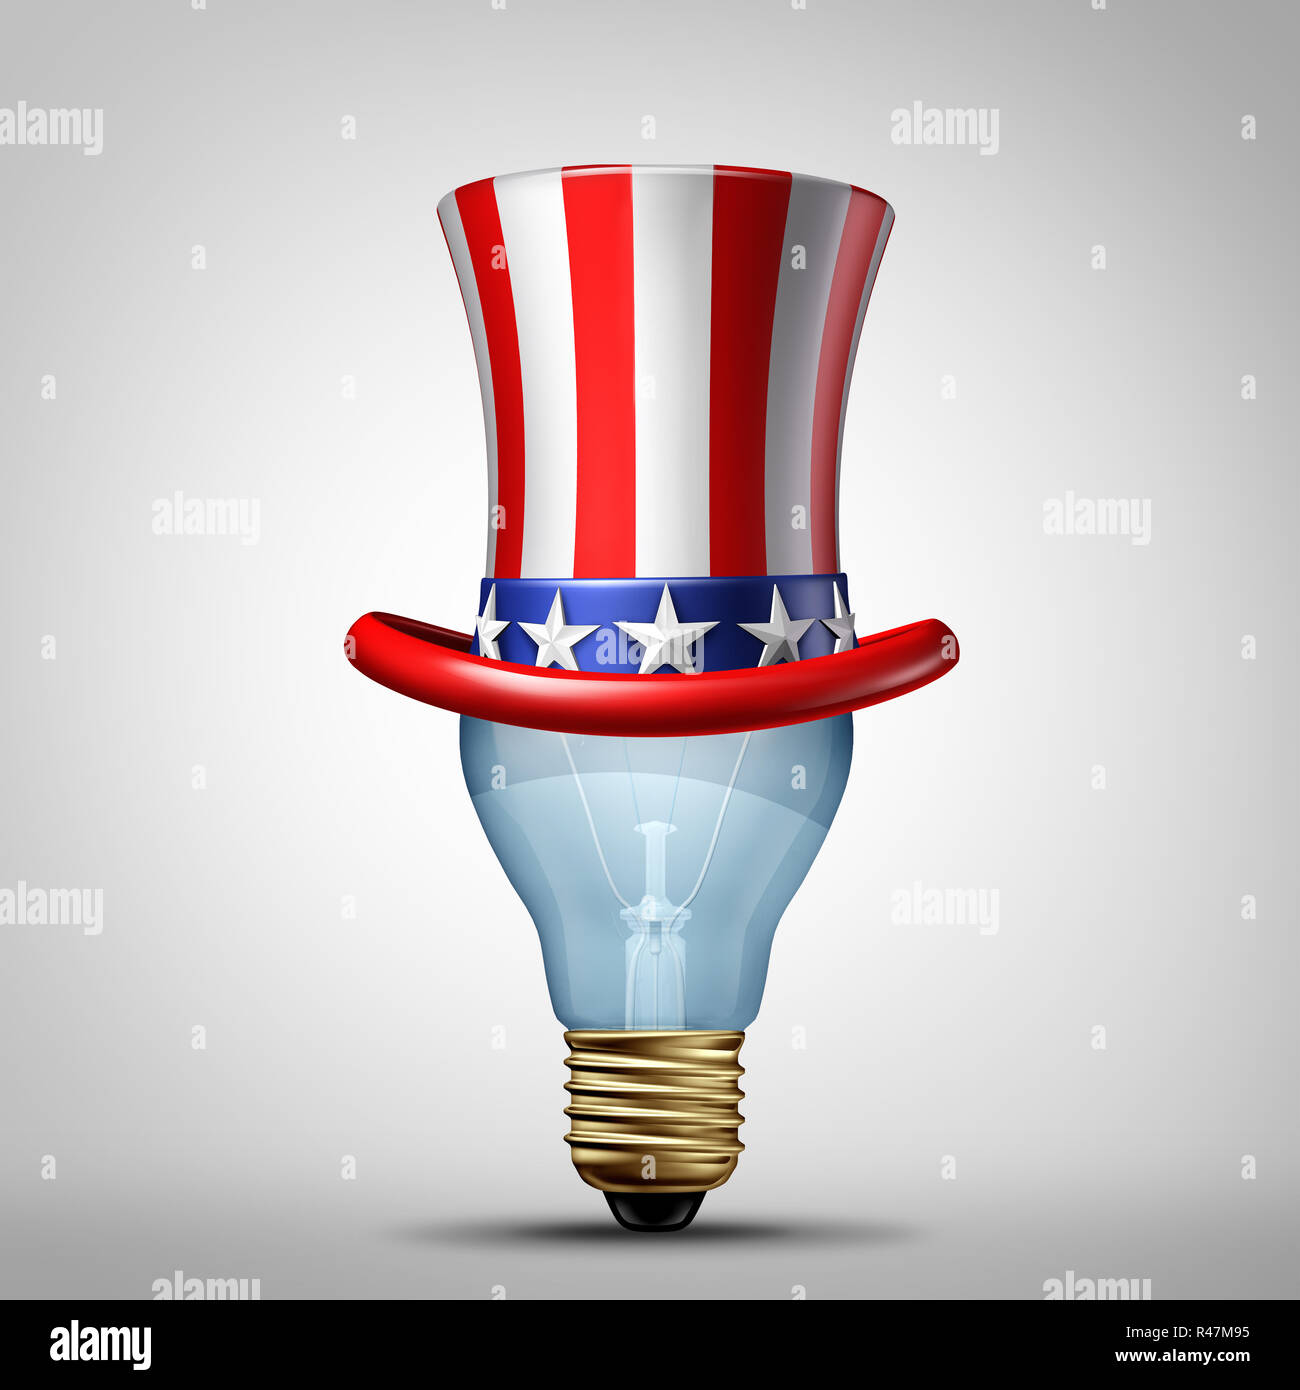 United States creativity and American creative ideas concept as a Us patriotic hat on a lightbulb as an illuminated light of imagination. Stock Photo